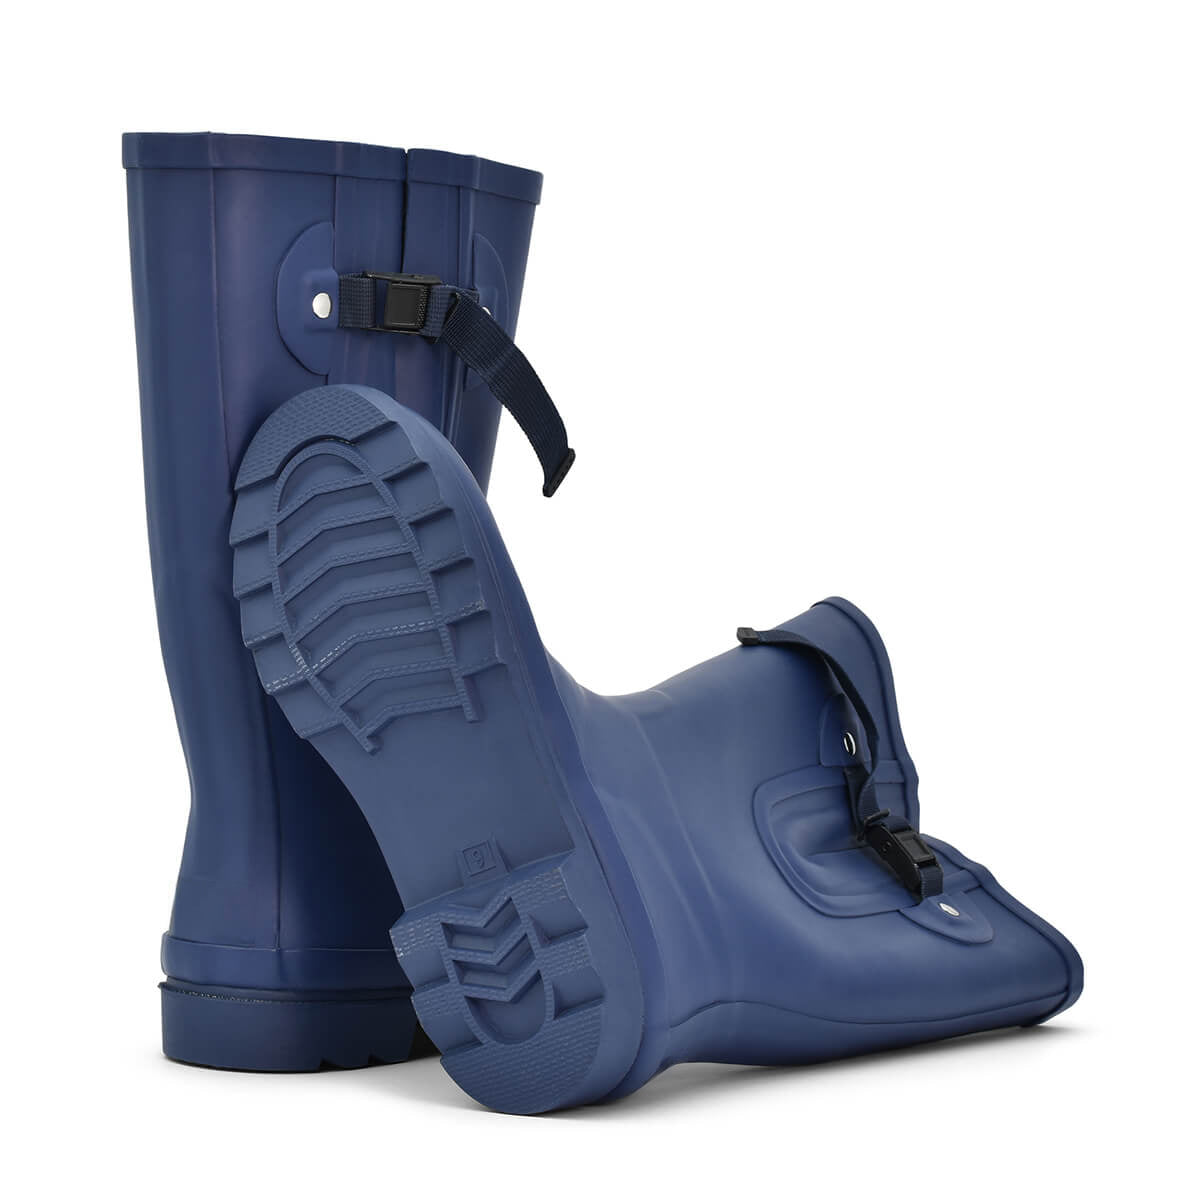 Navy Blue Classic Unisex Wide Calf Wellies – up to 50cm calf